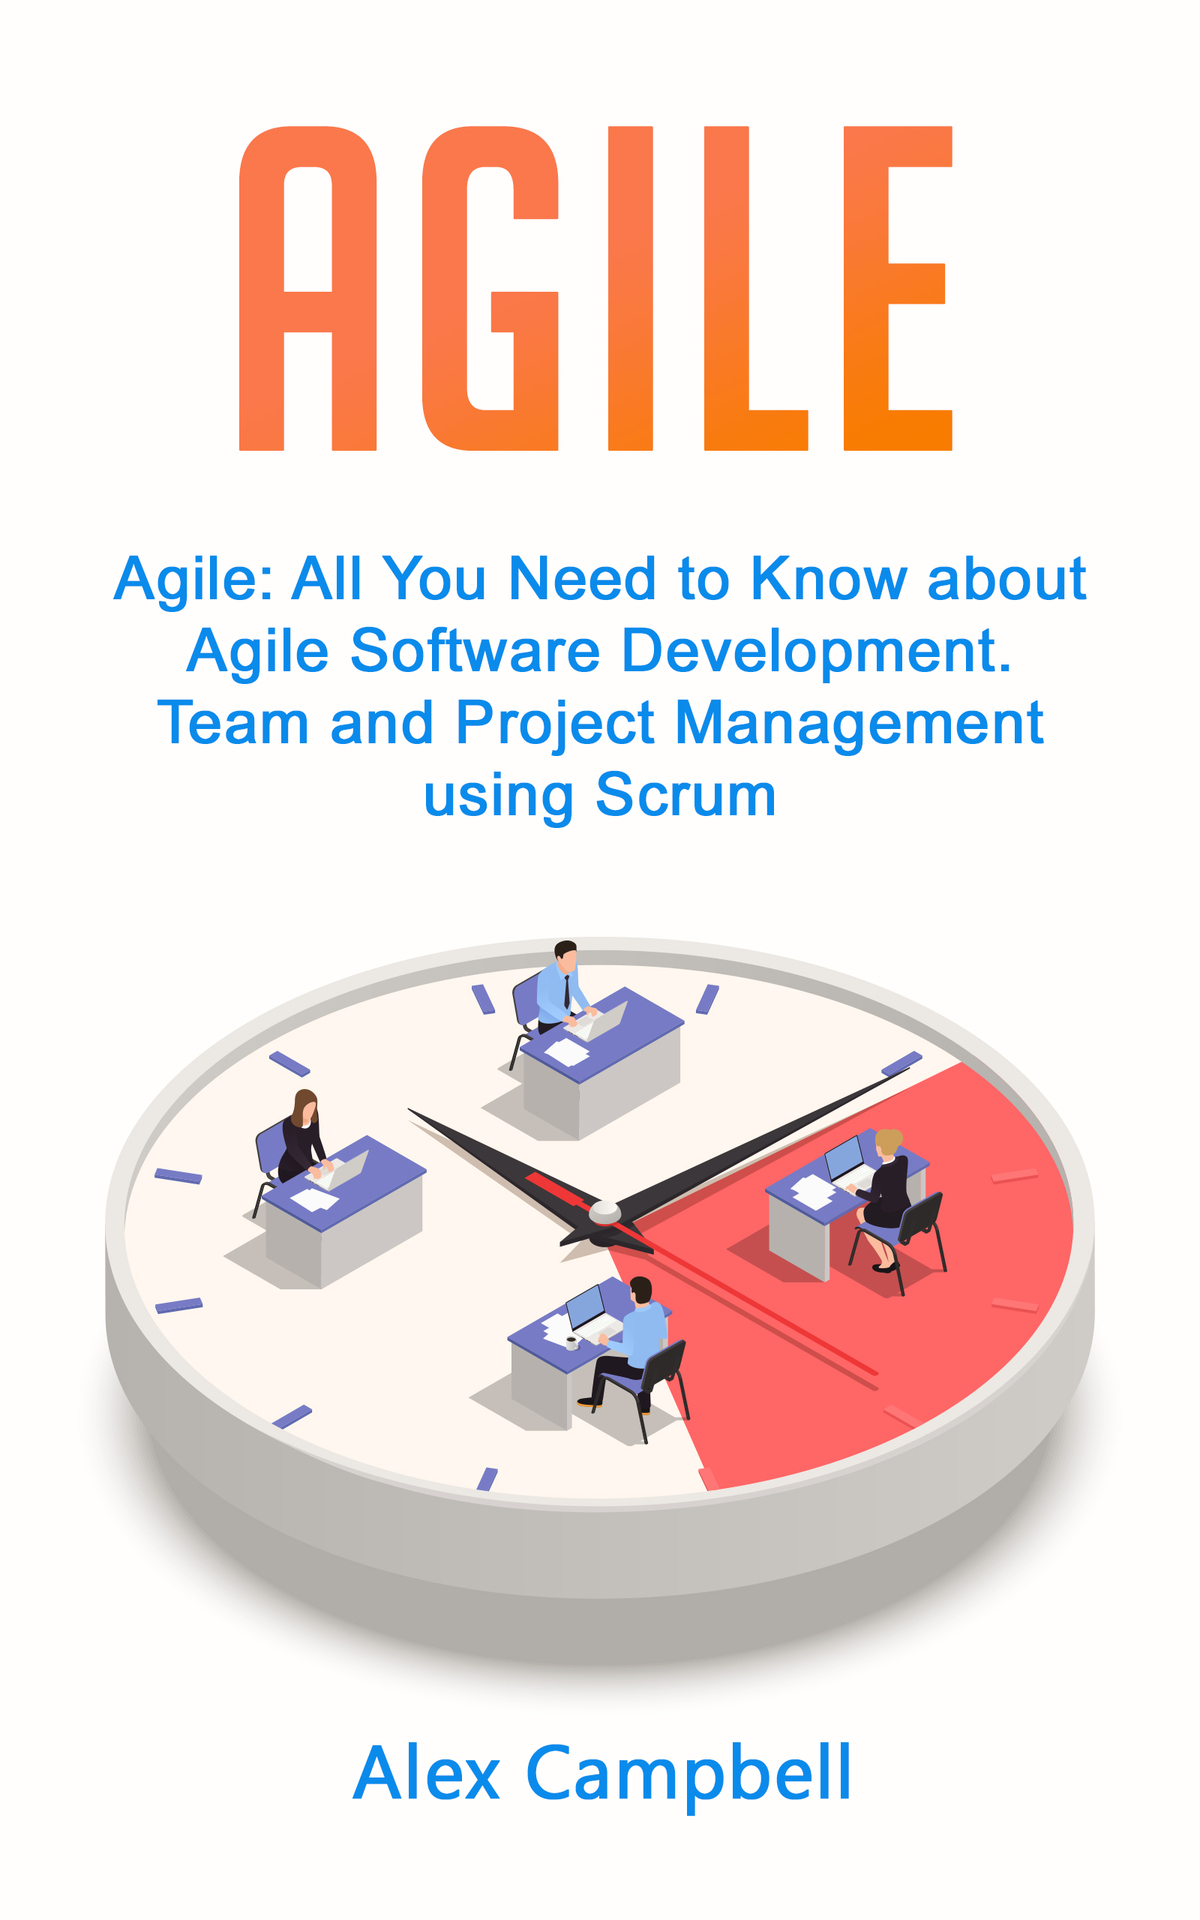 Agile: All You Need to Know about Agile Software Development. Team and Project Management using Scrum